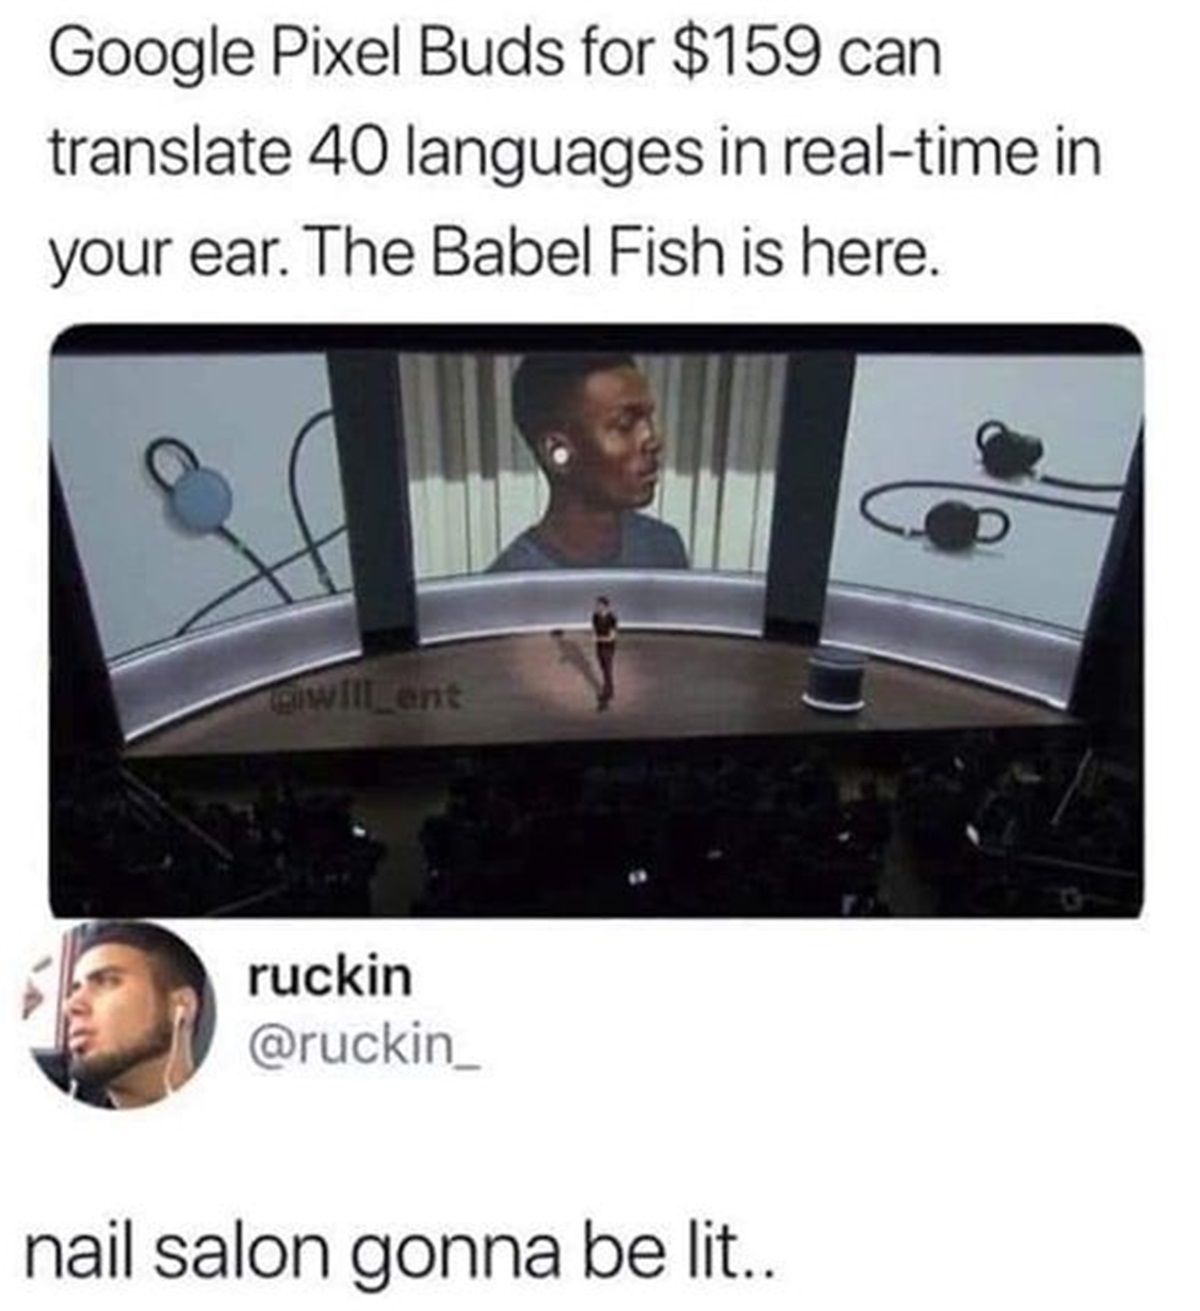 nail salons about to be lit meme - Google Pixel Buds for $159 can translate 40 languages in realtime in your ear. The Babel Fish is here. will ent ruckin nail salon gonna be lit..